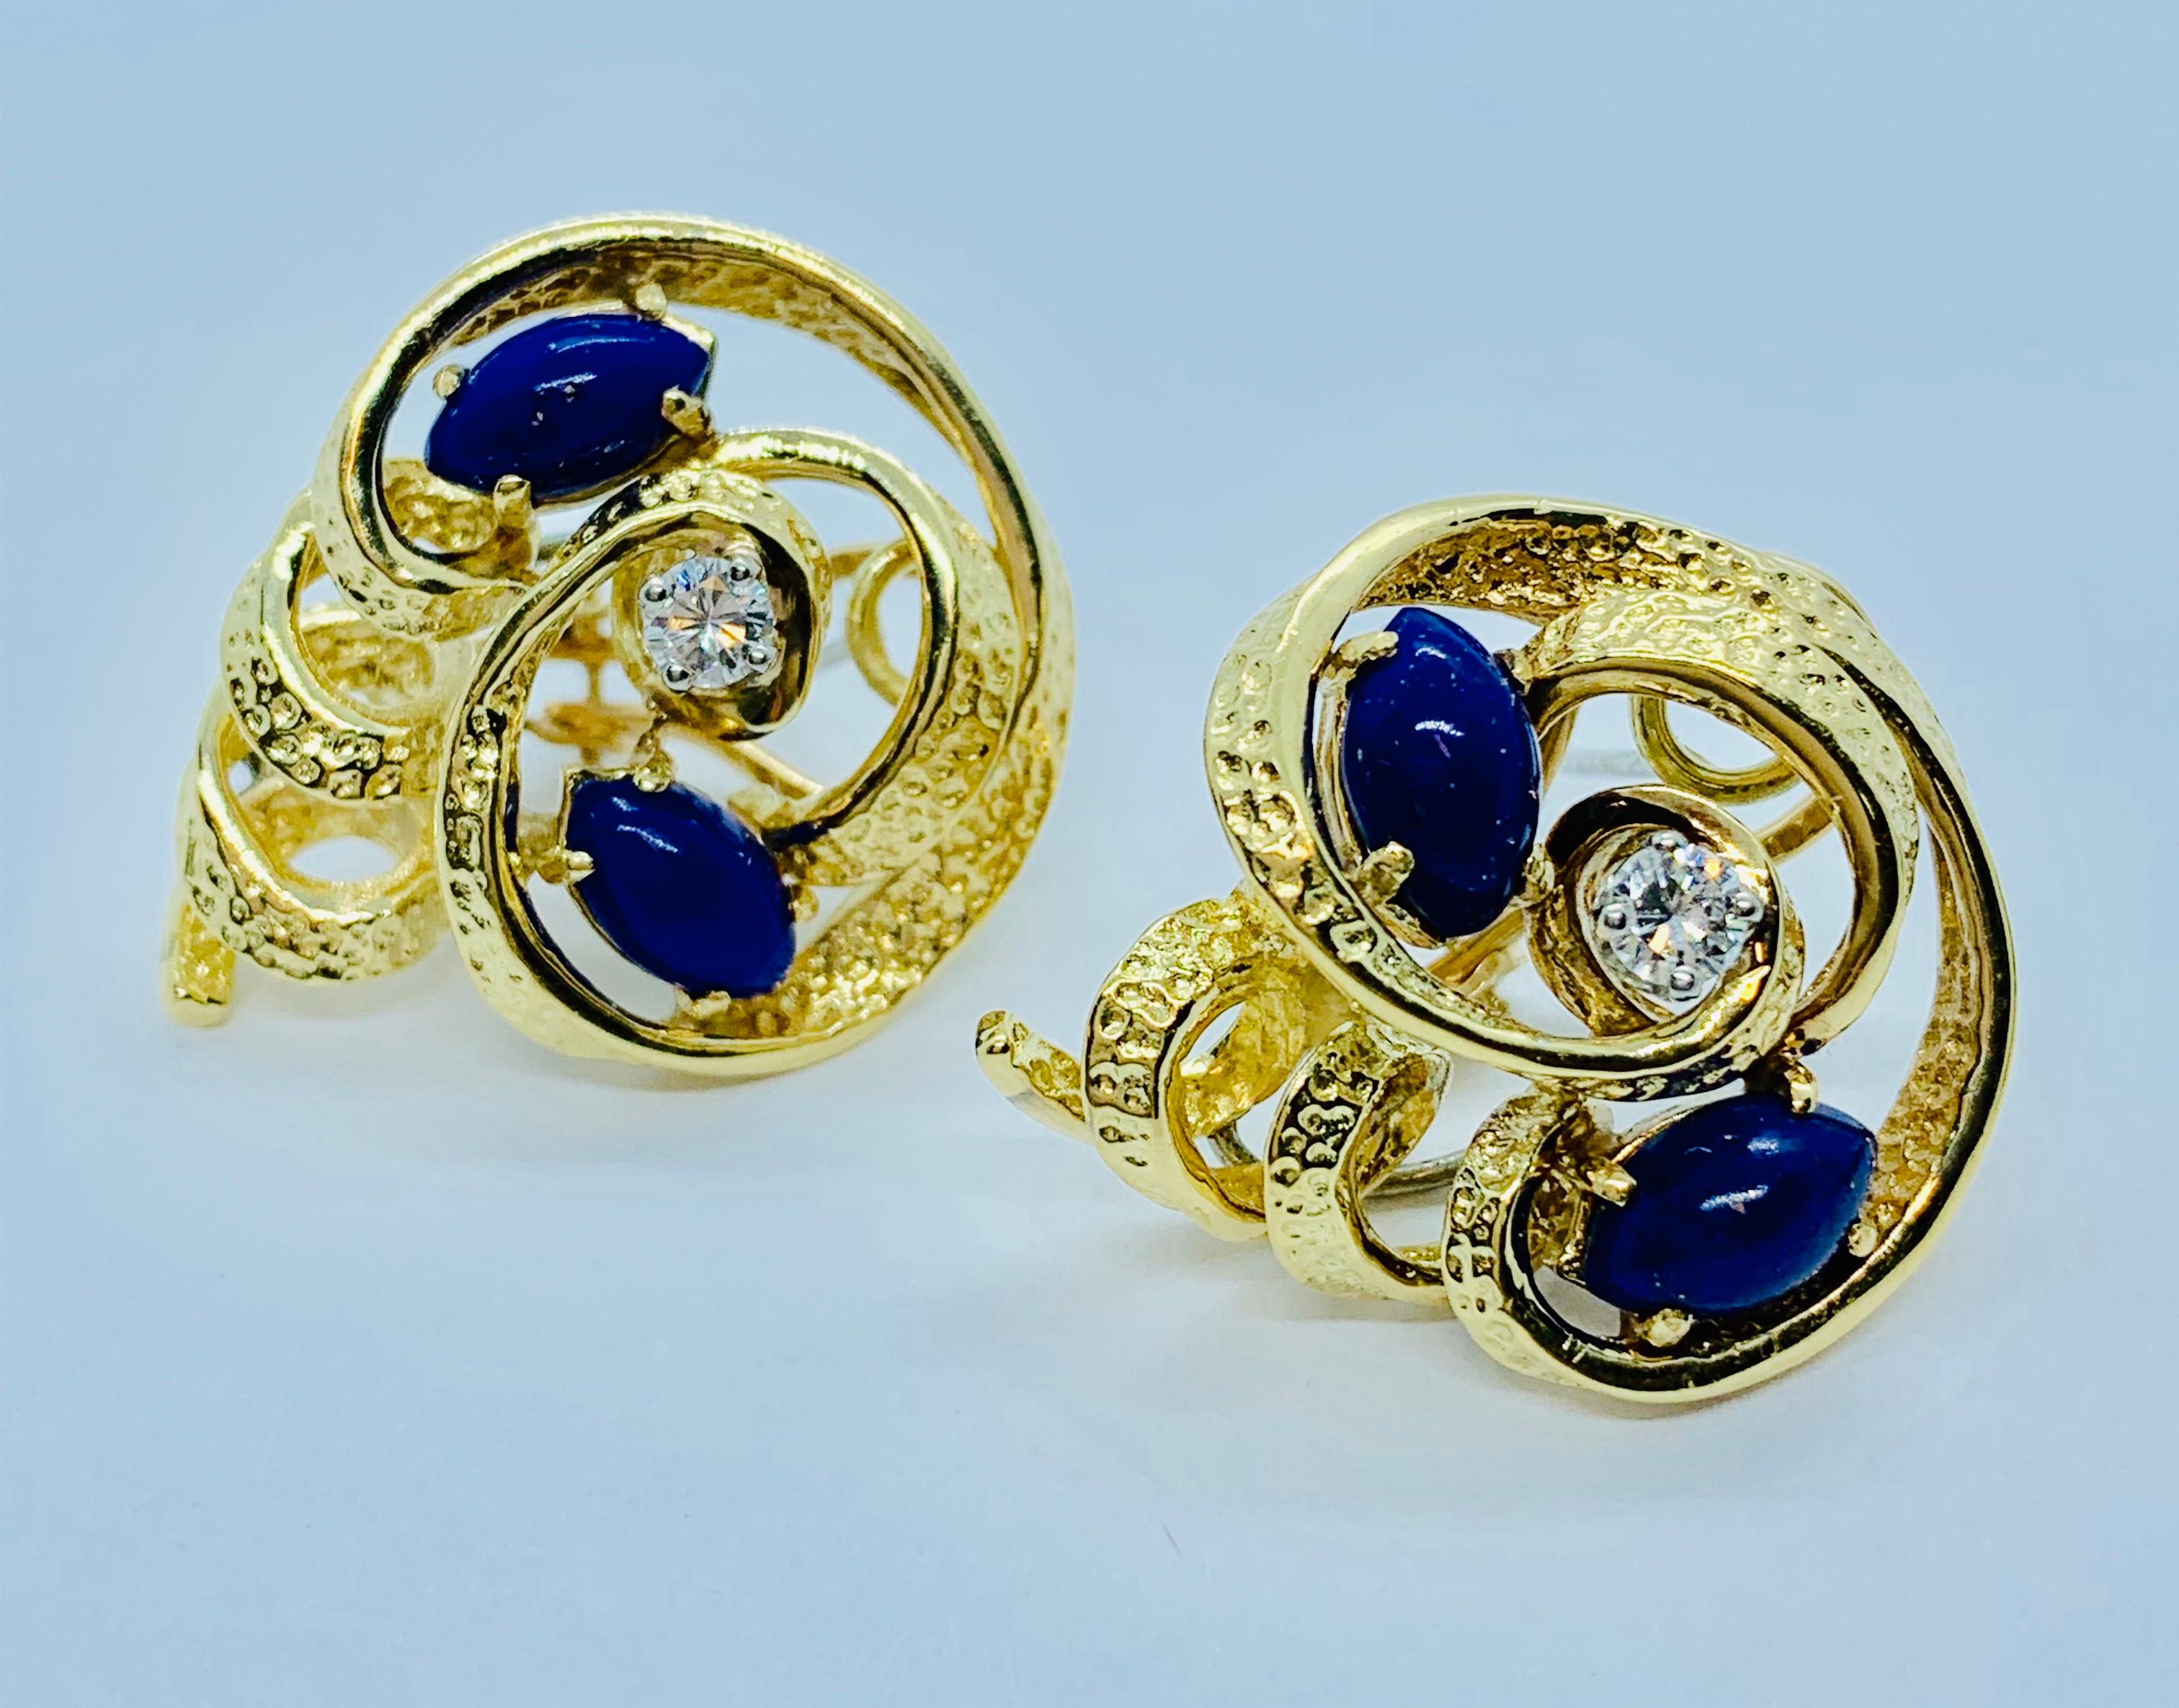 Absolutely Stunning Peter Linderman Dangle Earrings!!!! These are made in 18K Yellow Gold with Diamonds and Cabochon Blue Lapis Lazuli. These Earrings are 2.5 inches long and can be worn two ways as the dangles are removable! See pictures. With